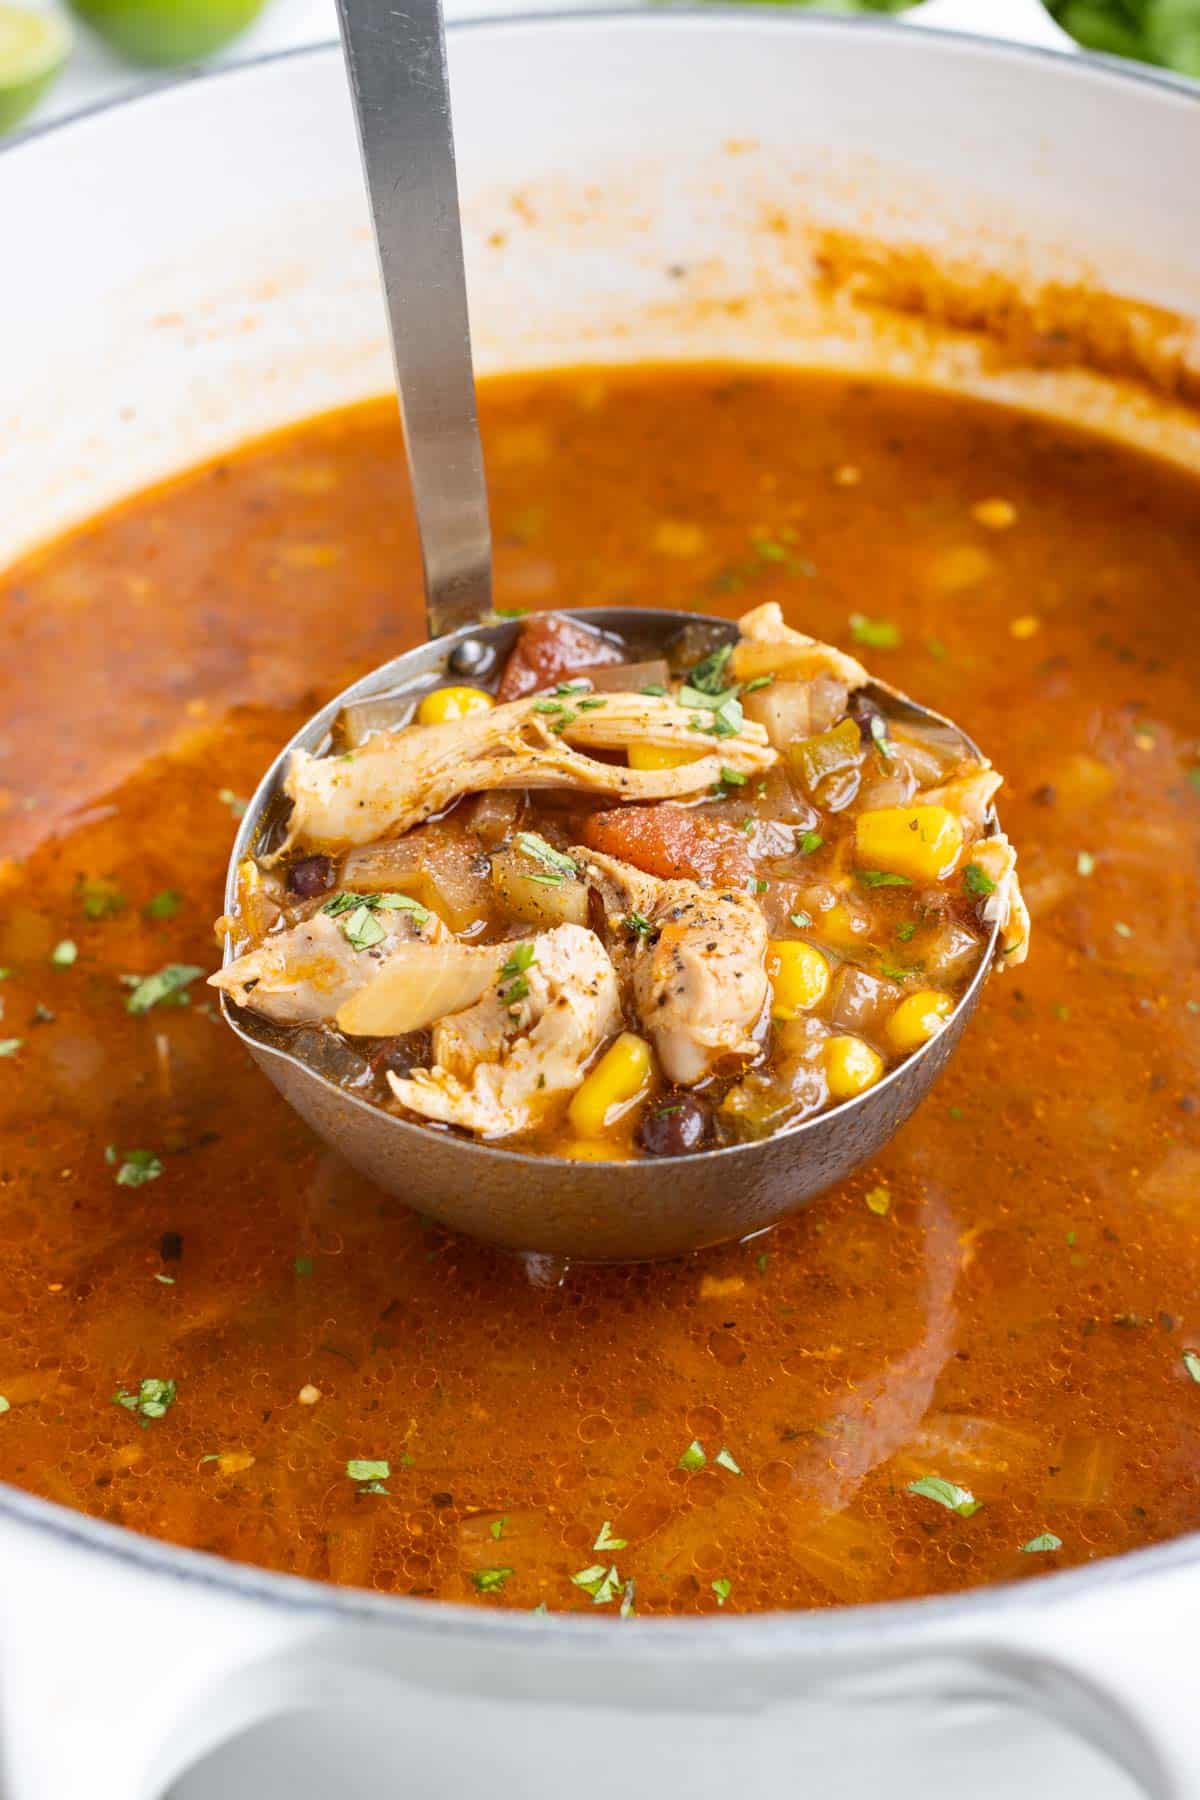 A ladle scoops delicious chicken taco soup out of the pot.